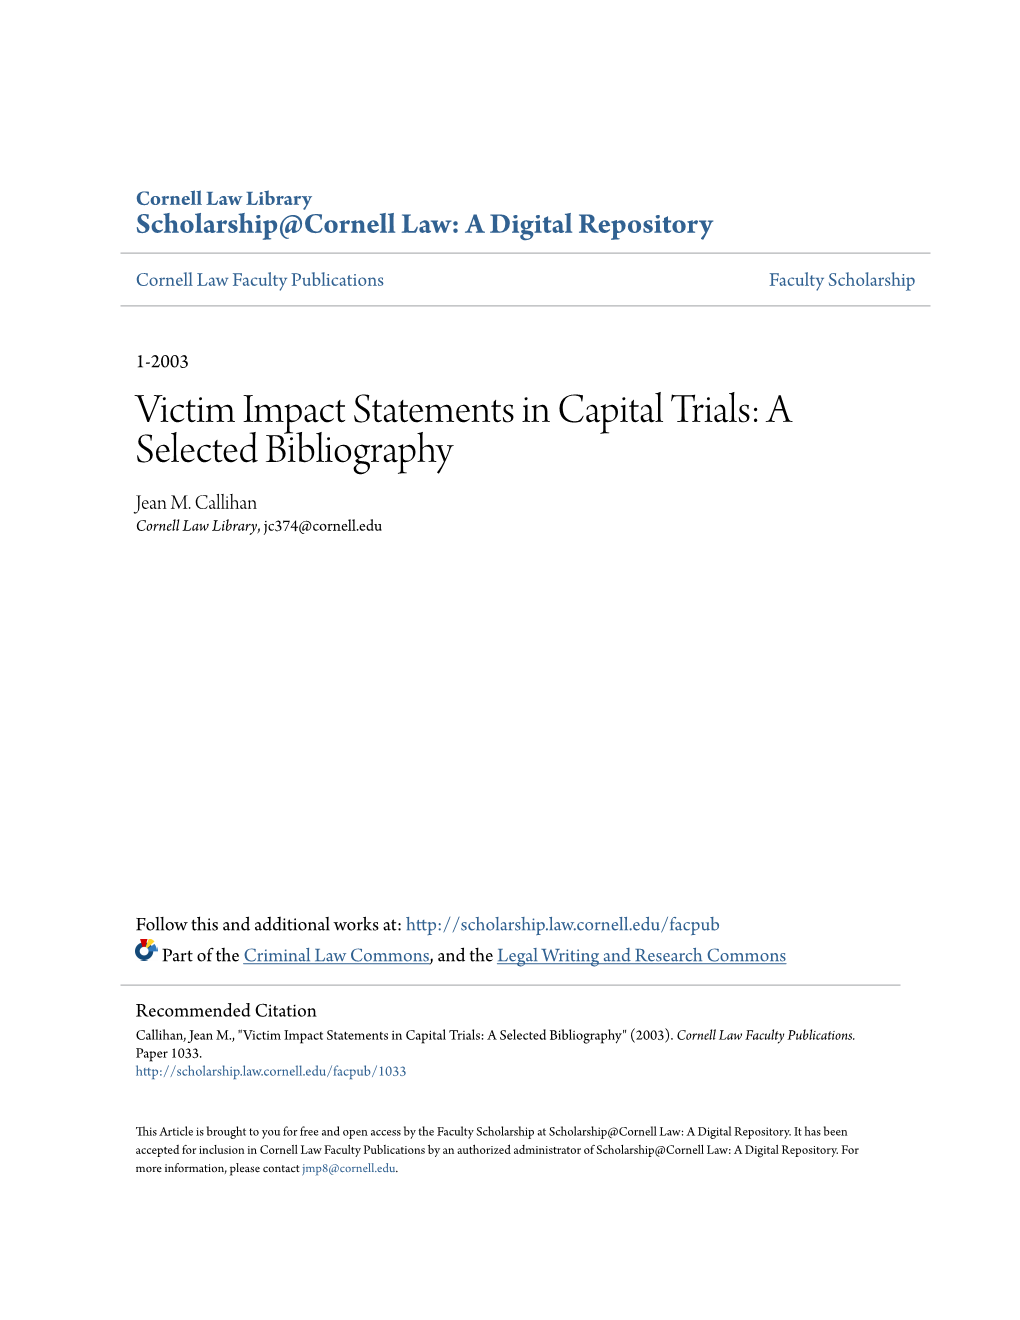 Victim Impact Statements in Capital Trials: a Selected Bibliography Jean M